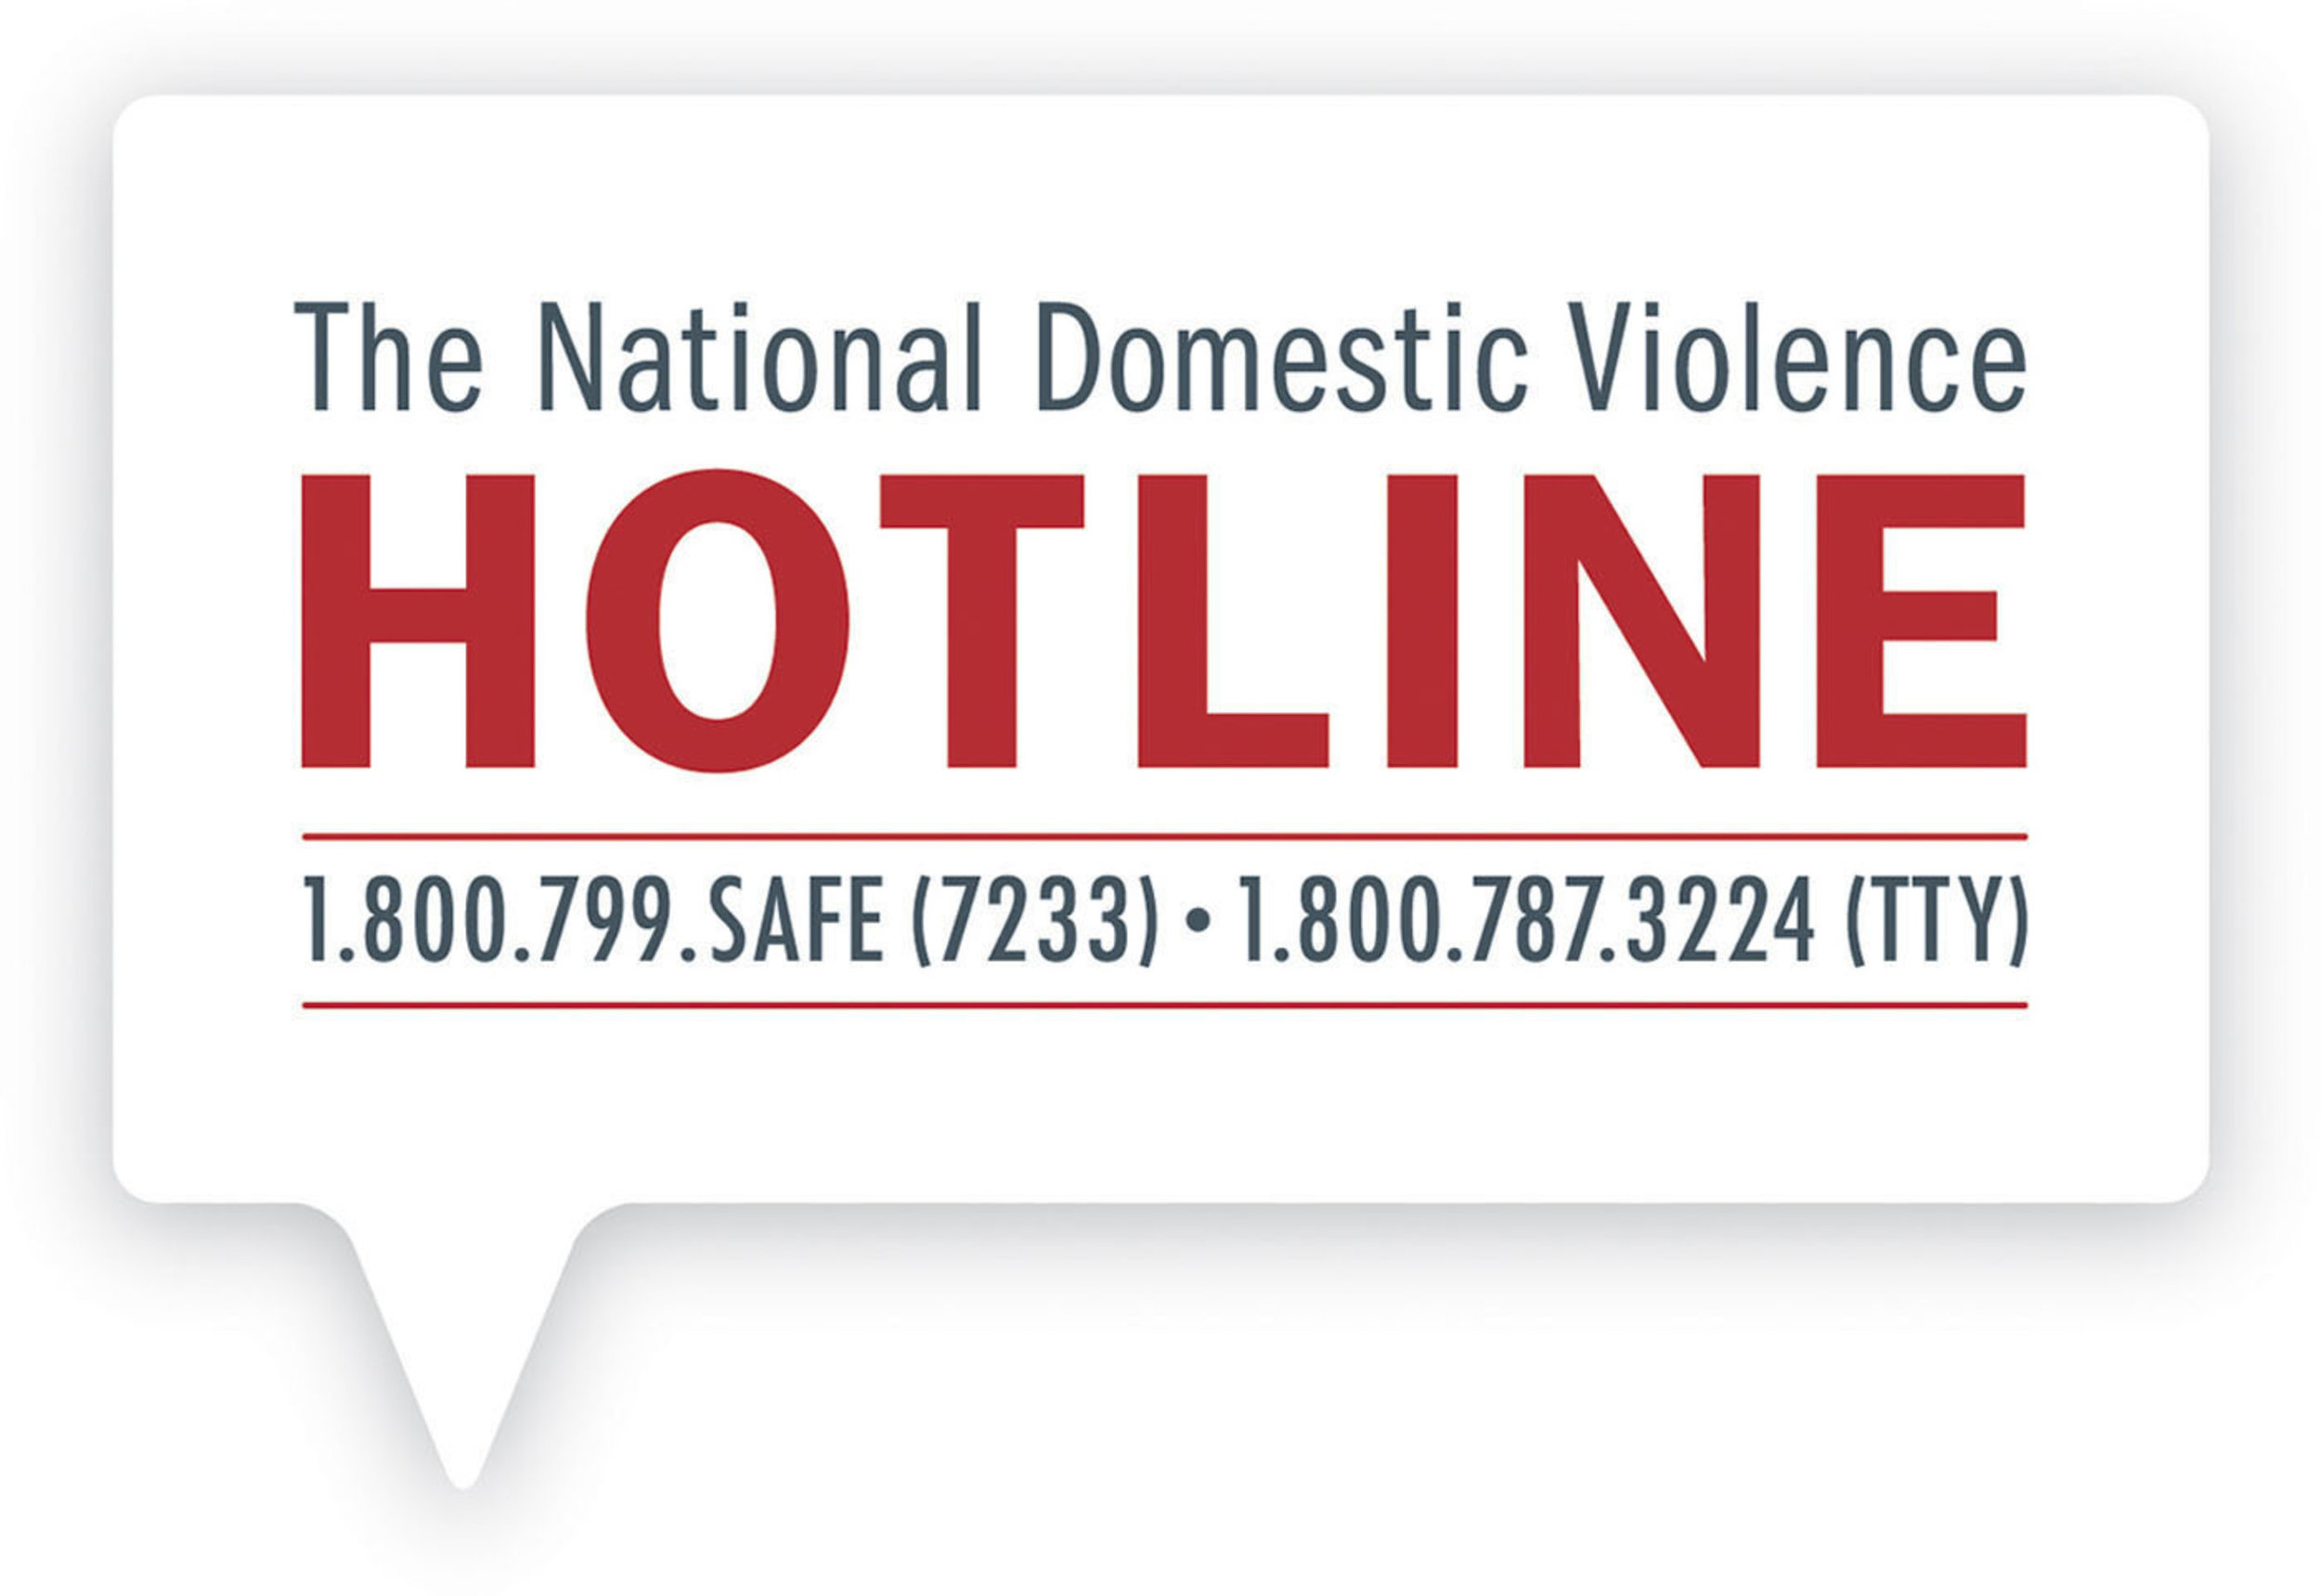 The National Domestic Violence Hotline